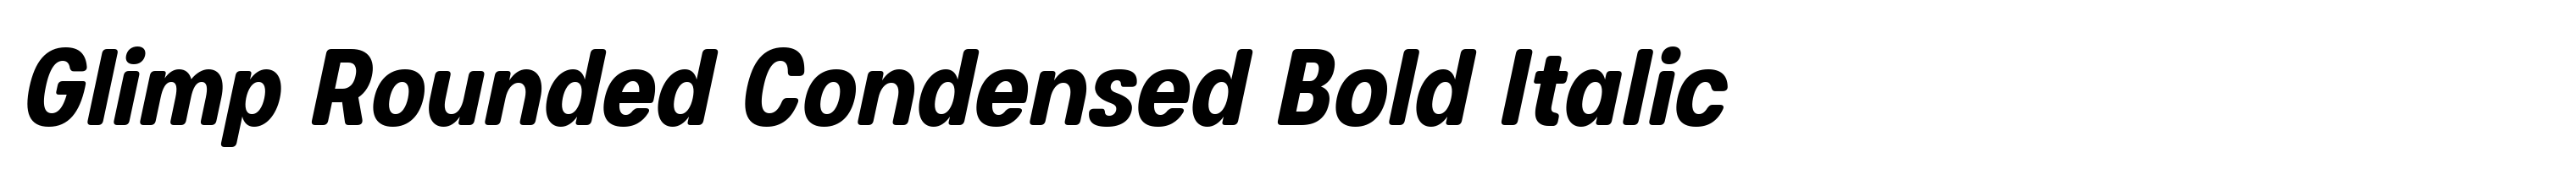 Glimp Rounded Condensed Bold Italic